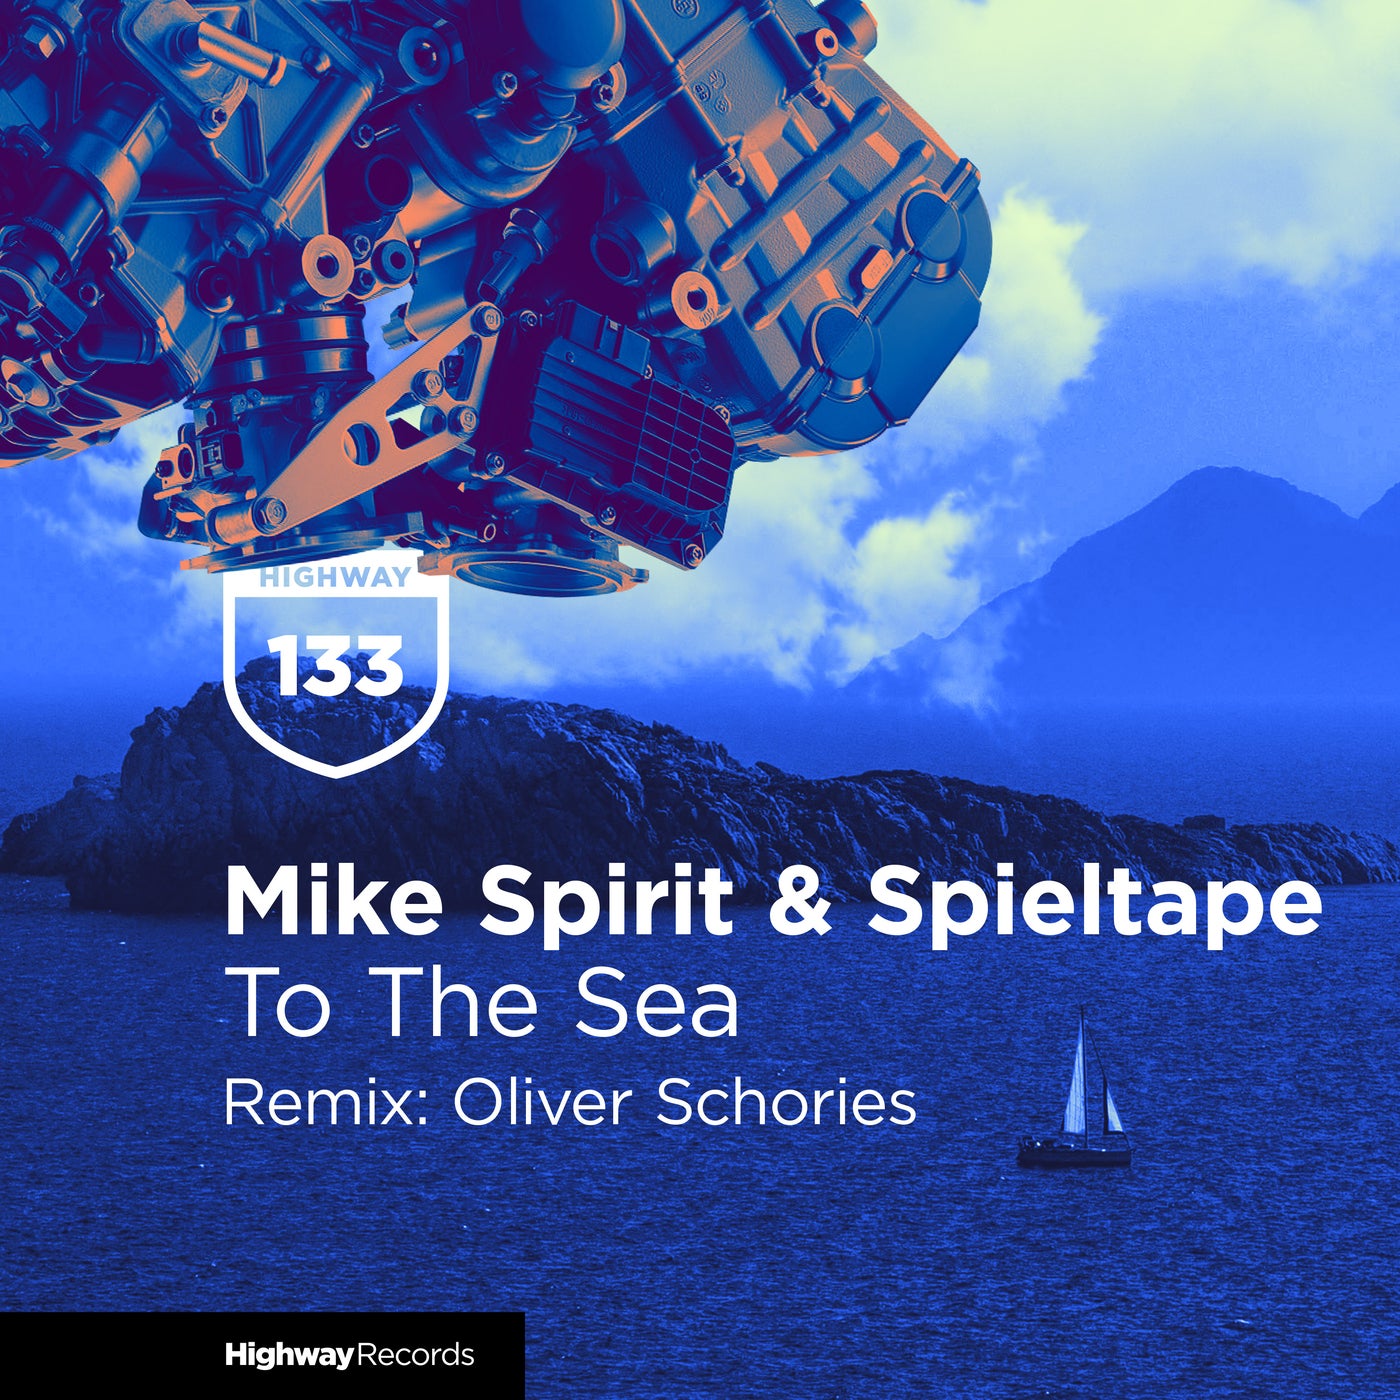 To The Sea (Oliver Schories Remix)